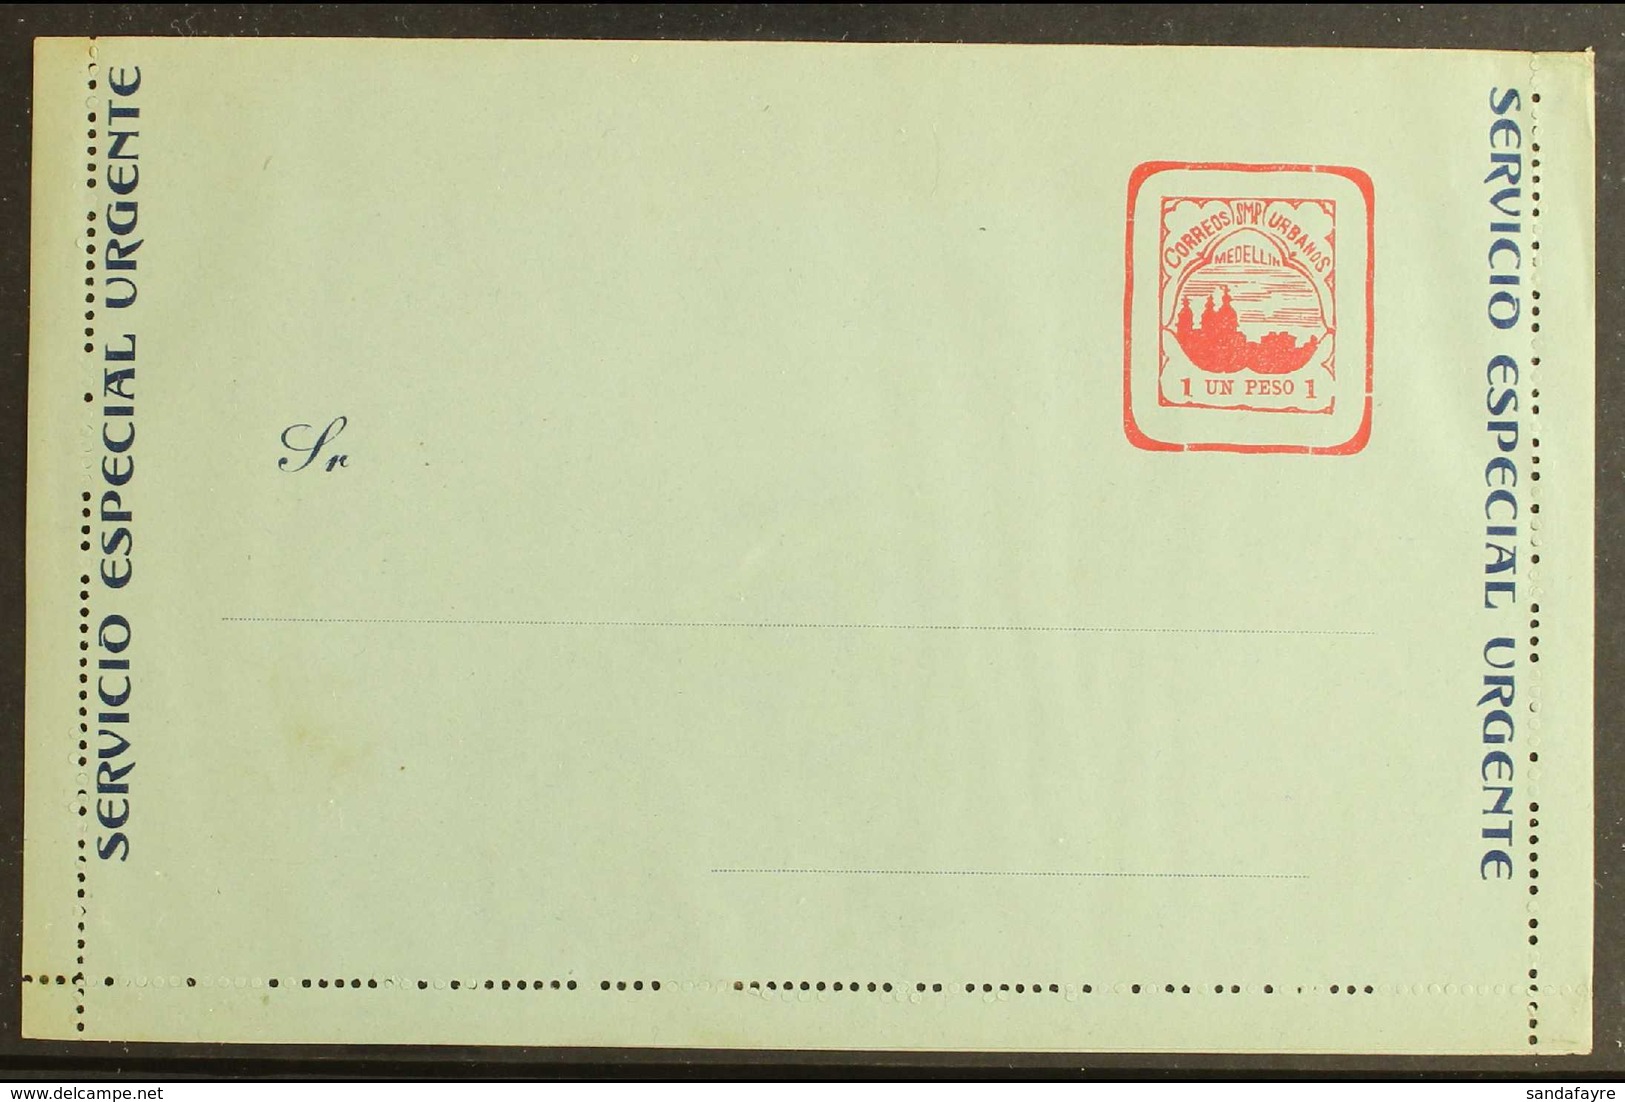 MEDELLIN - POSTAL STATIONERY  1904 Letter Card "Un Peso" Red On Light Green With Dark Blue Text, Higgins & Gage 1, Very  - Colombia